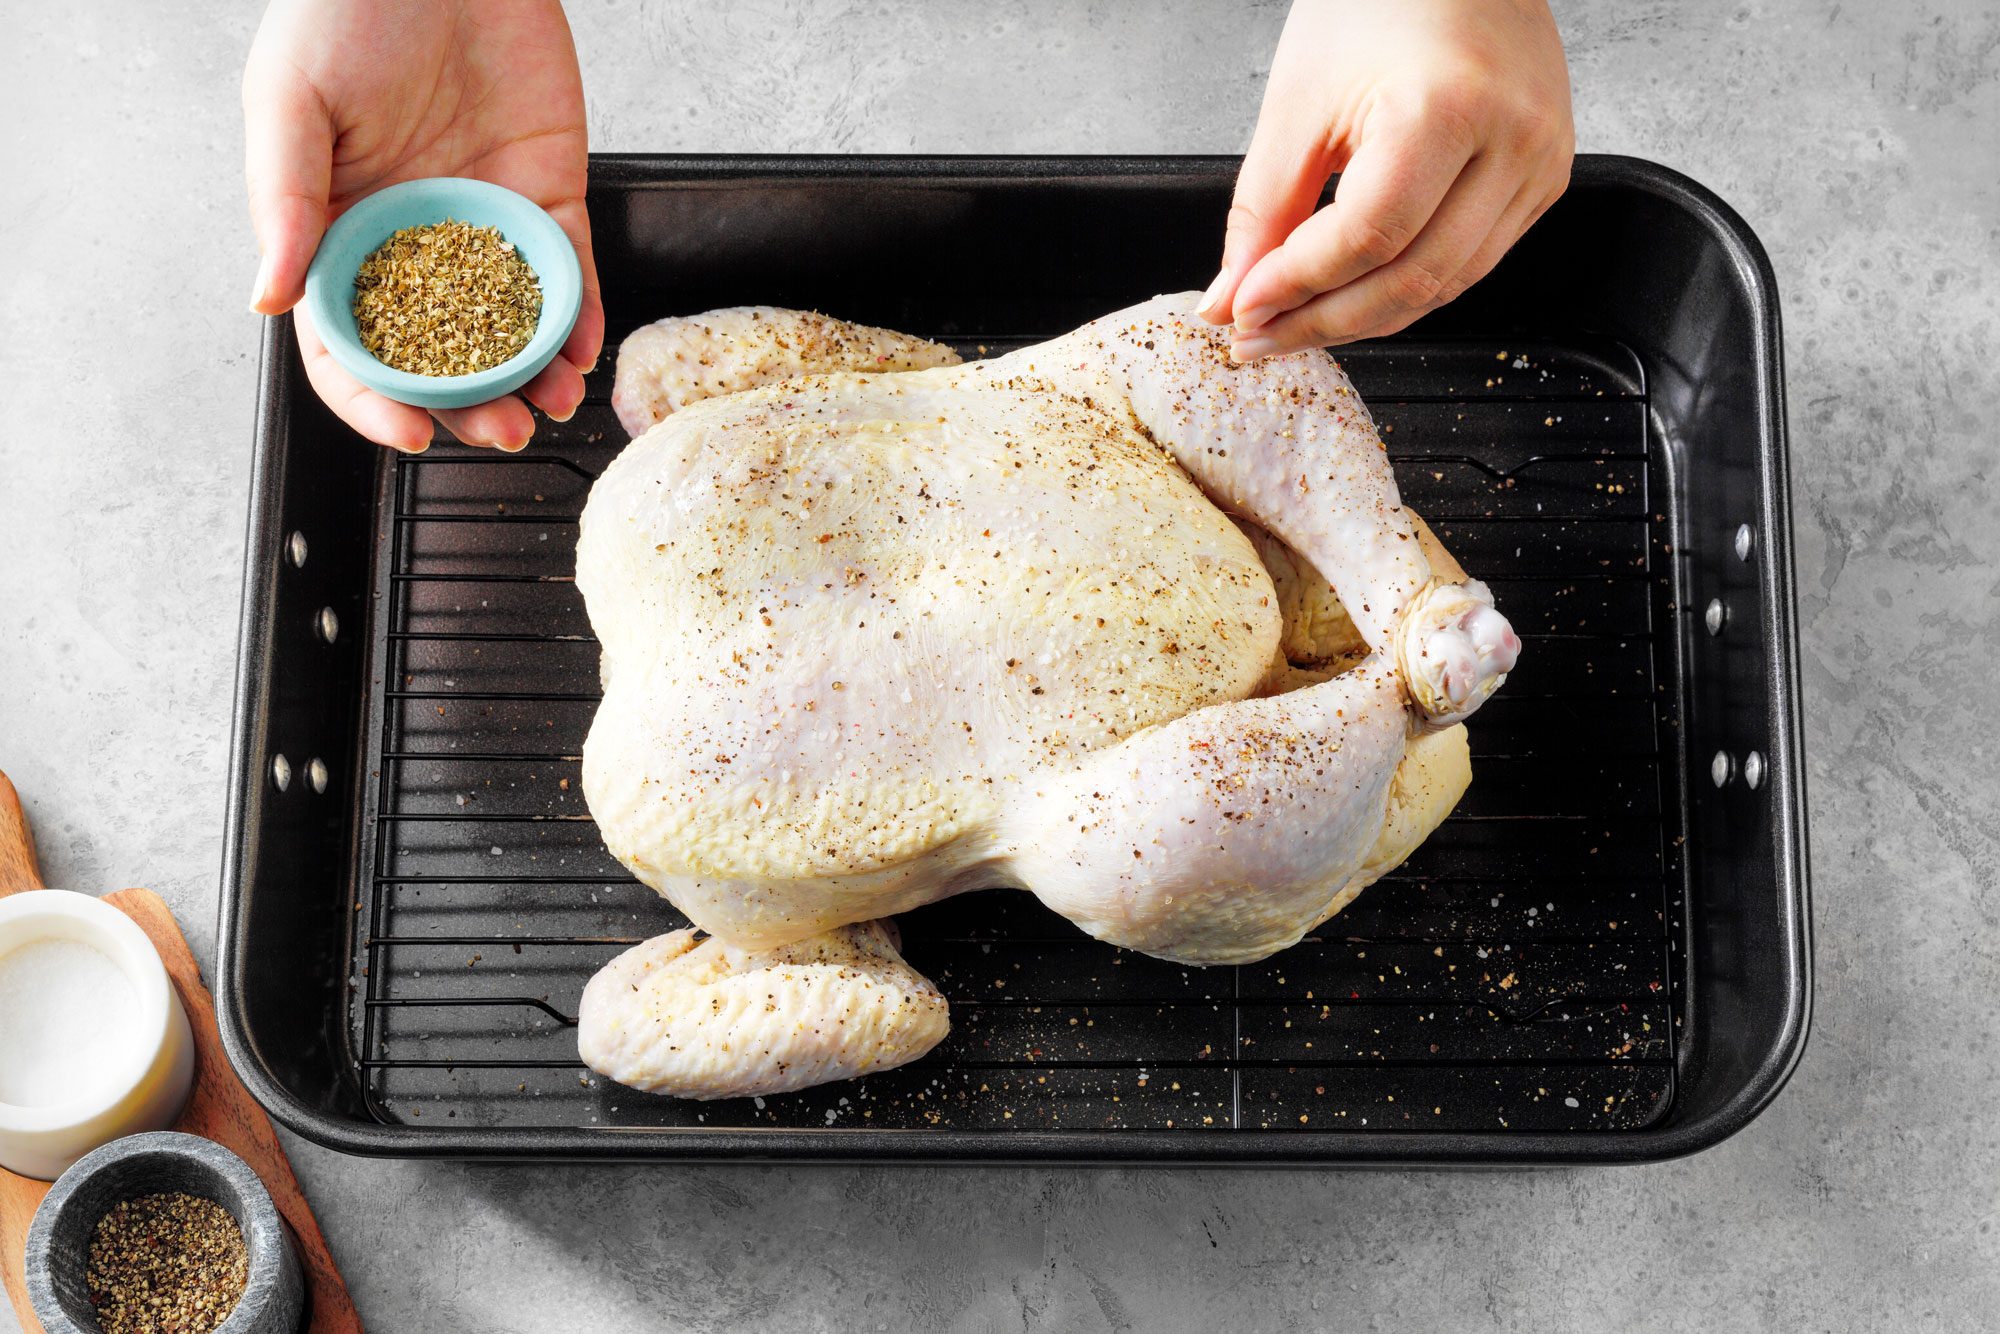 Sprinkling Oregano over chicken placed in a roasting pan on marble surface